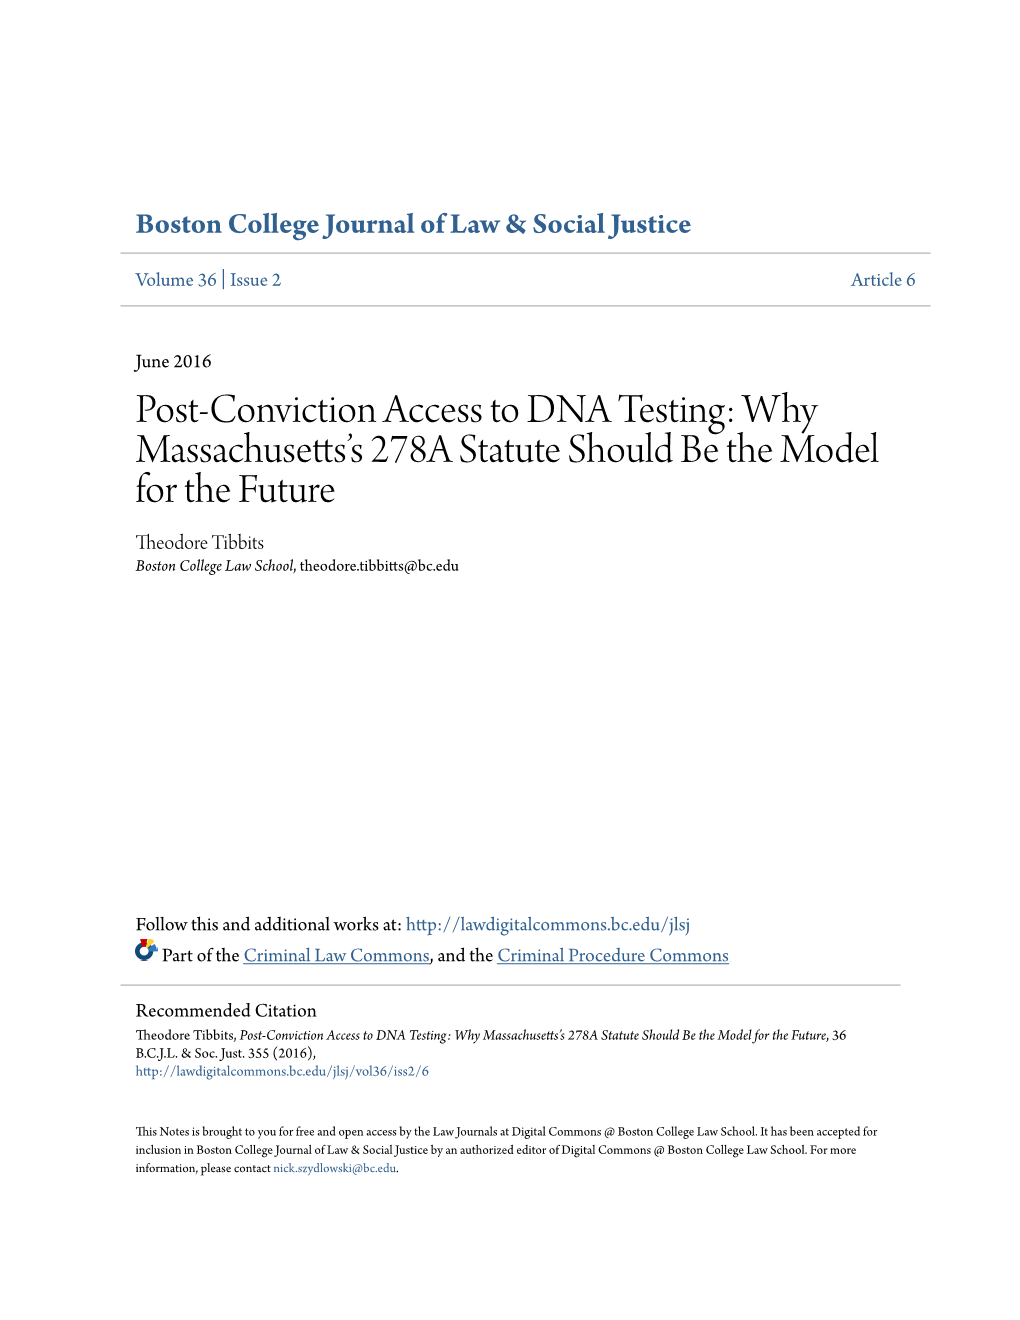 Post-Conviction Access to DNA Testing